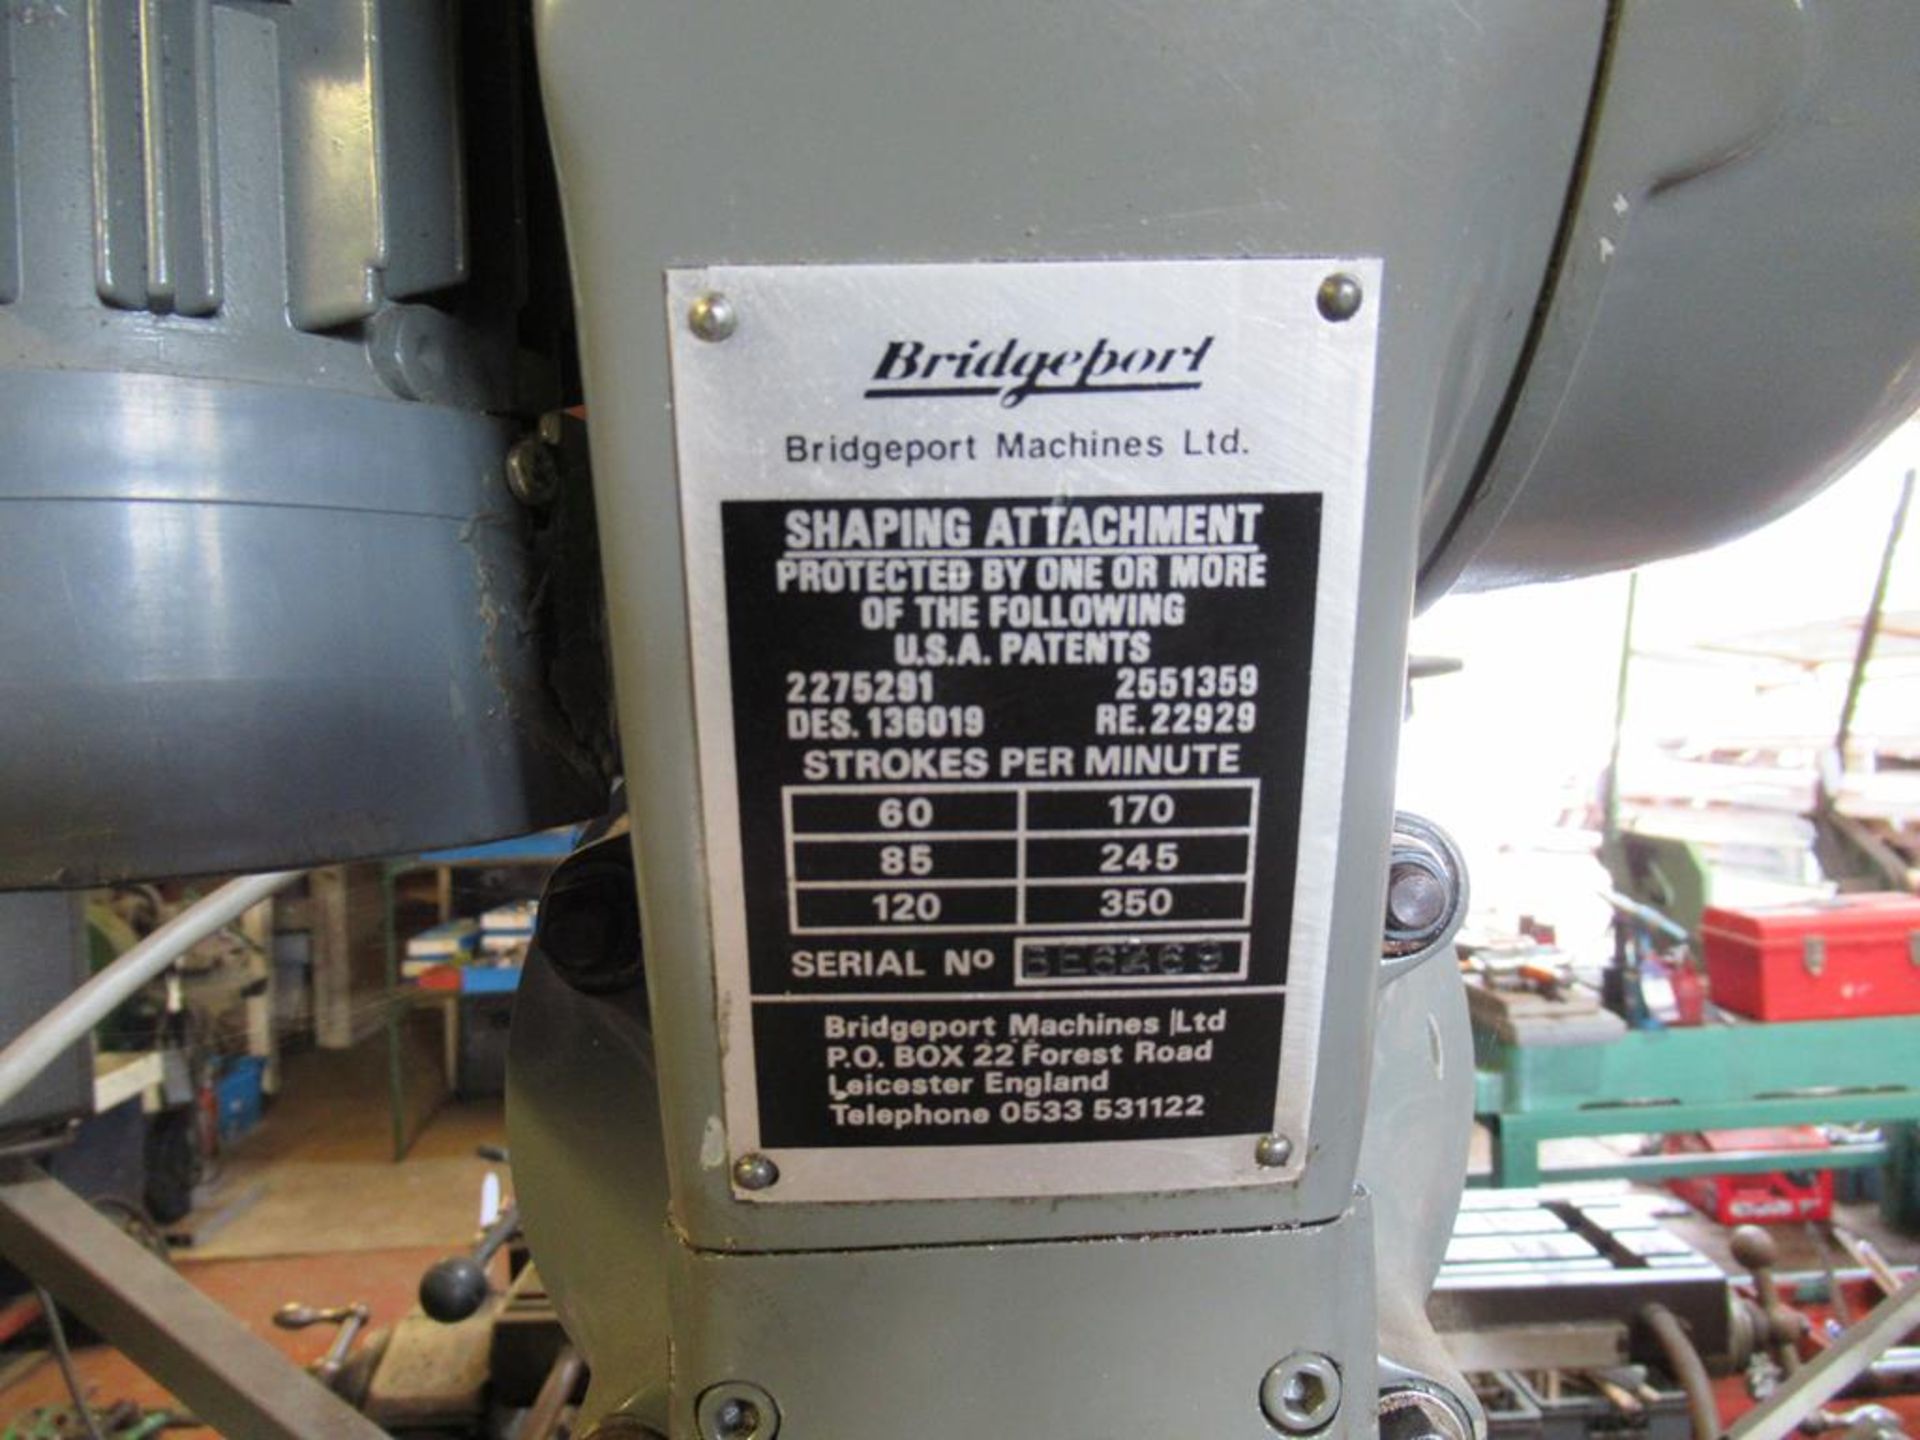 Bridgeport series I 2HP turret mill with shaping attachment, power feed and two axis Dro - Image 9 of 9